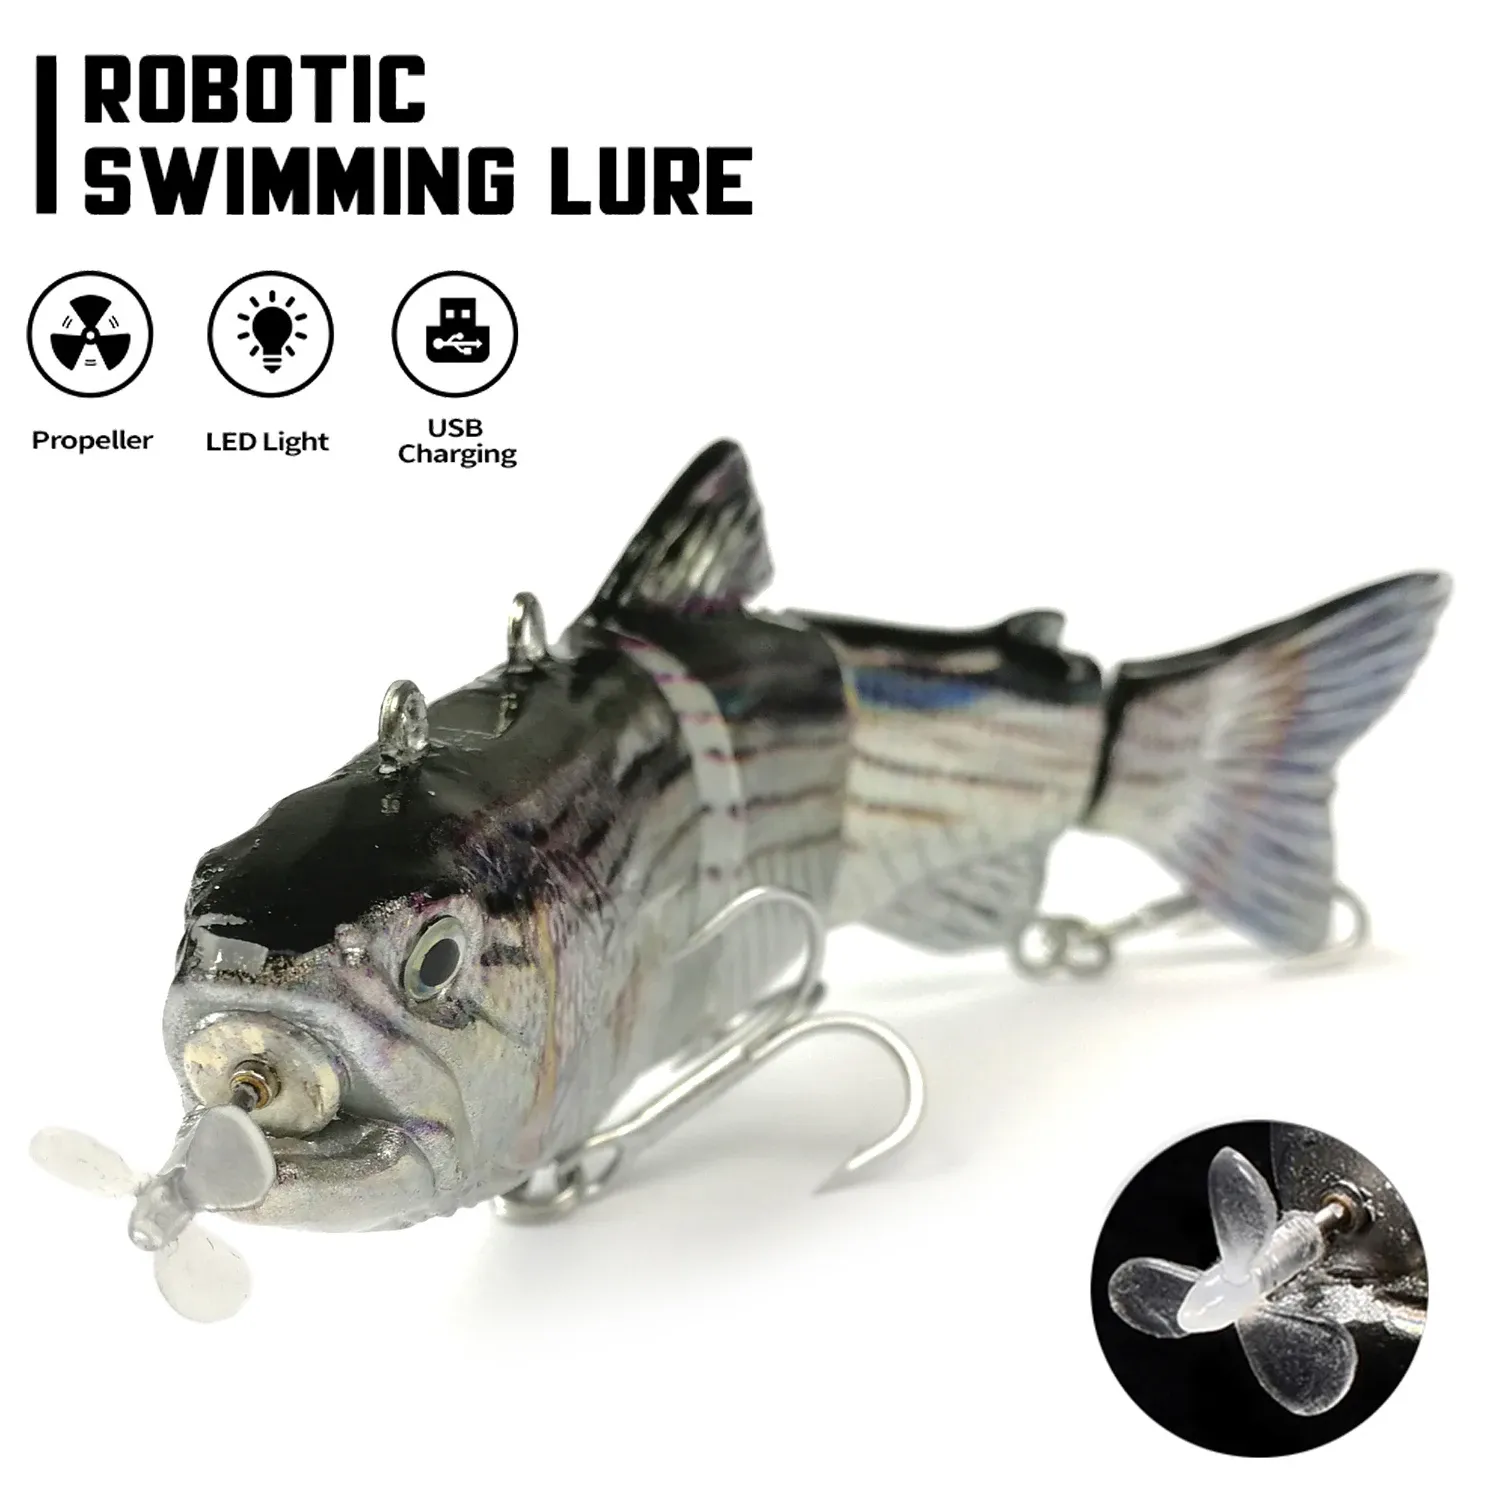 Accessories Robotic Fishing Sinking Minnow 130mm/35g 54g Auto Swimbait Electric Wobblers Bait Usb Rechargeable Led Light Lure for Pike Bass